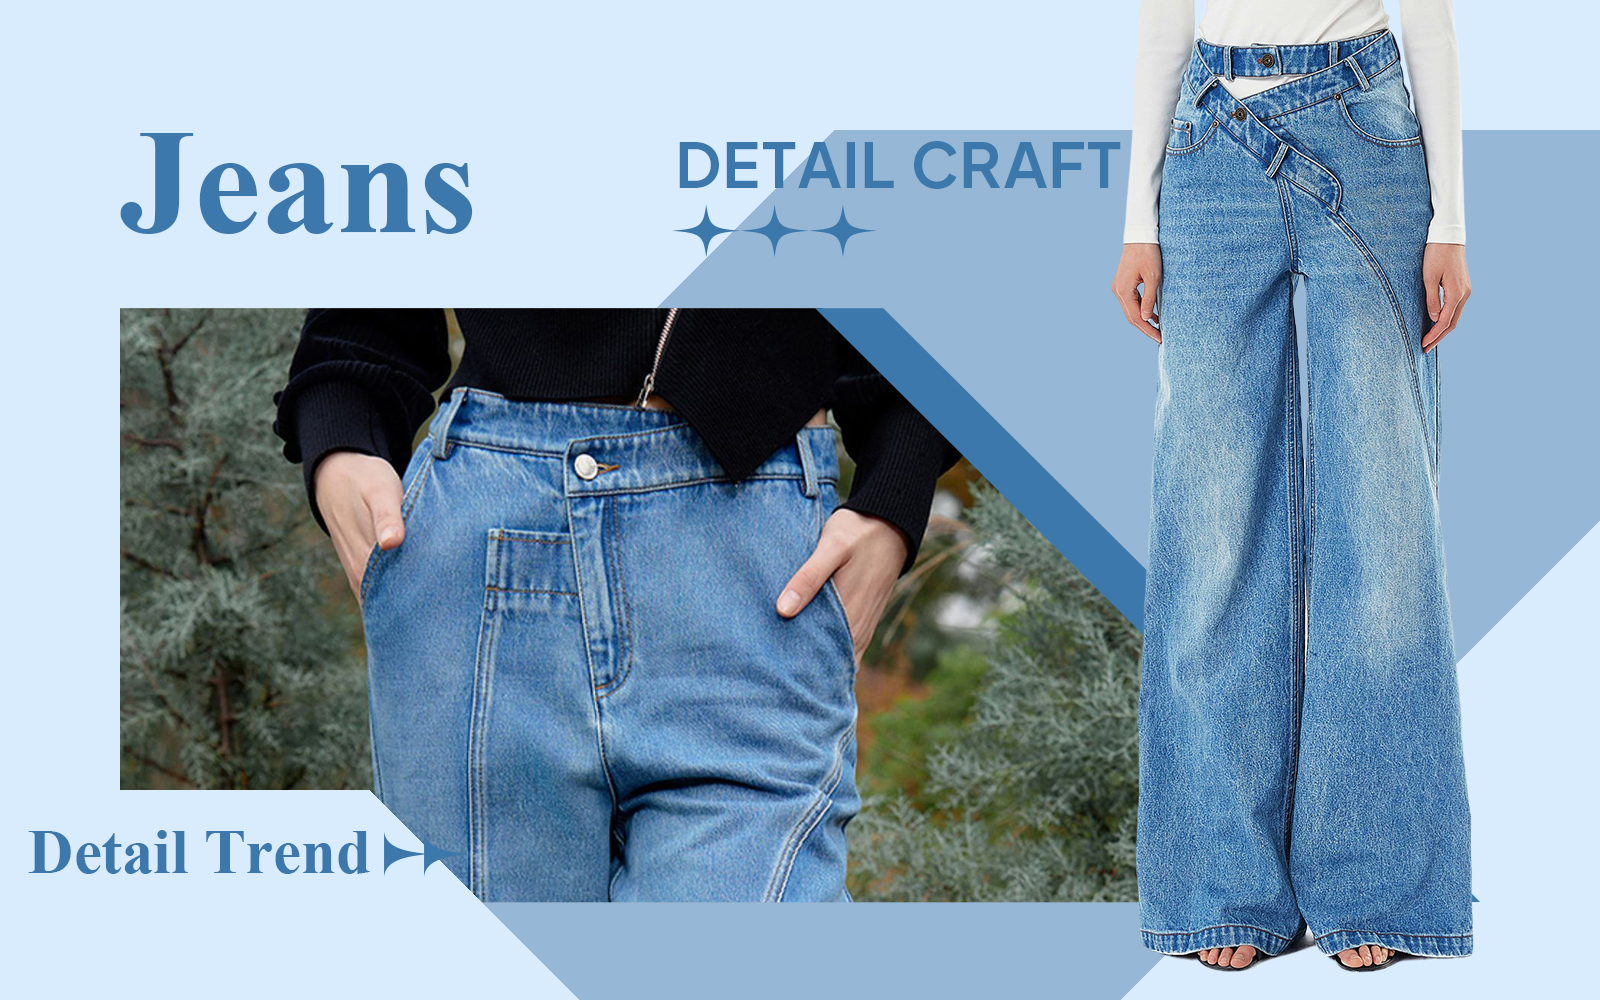 Waistband -- The Detail & Craft Trend for Jeans